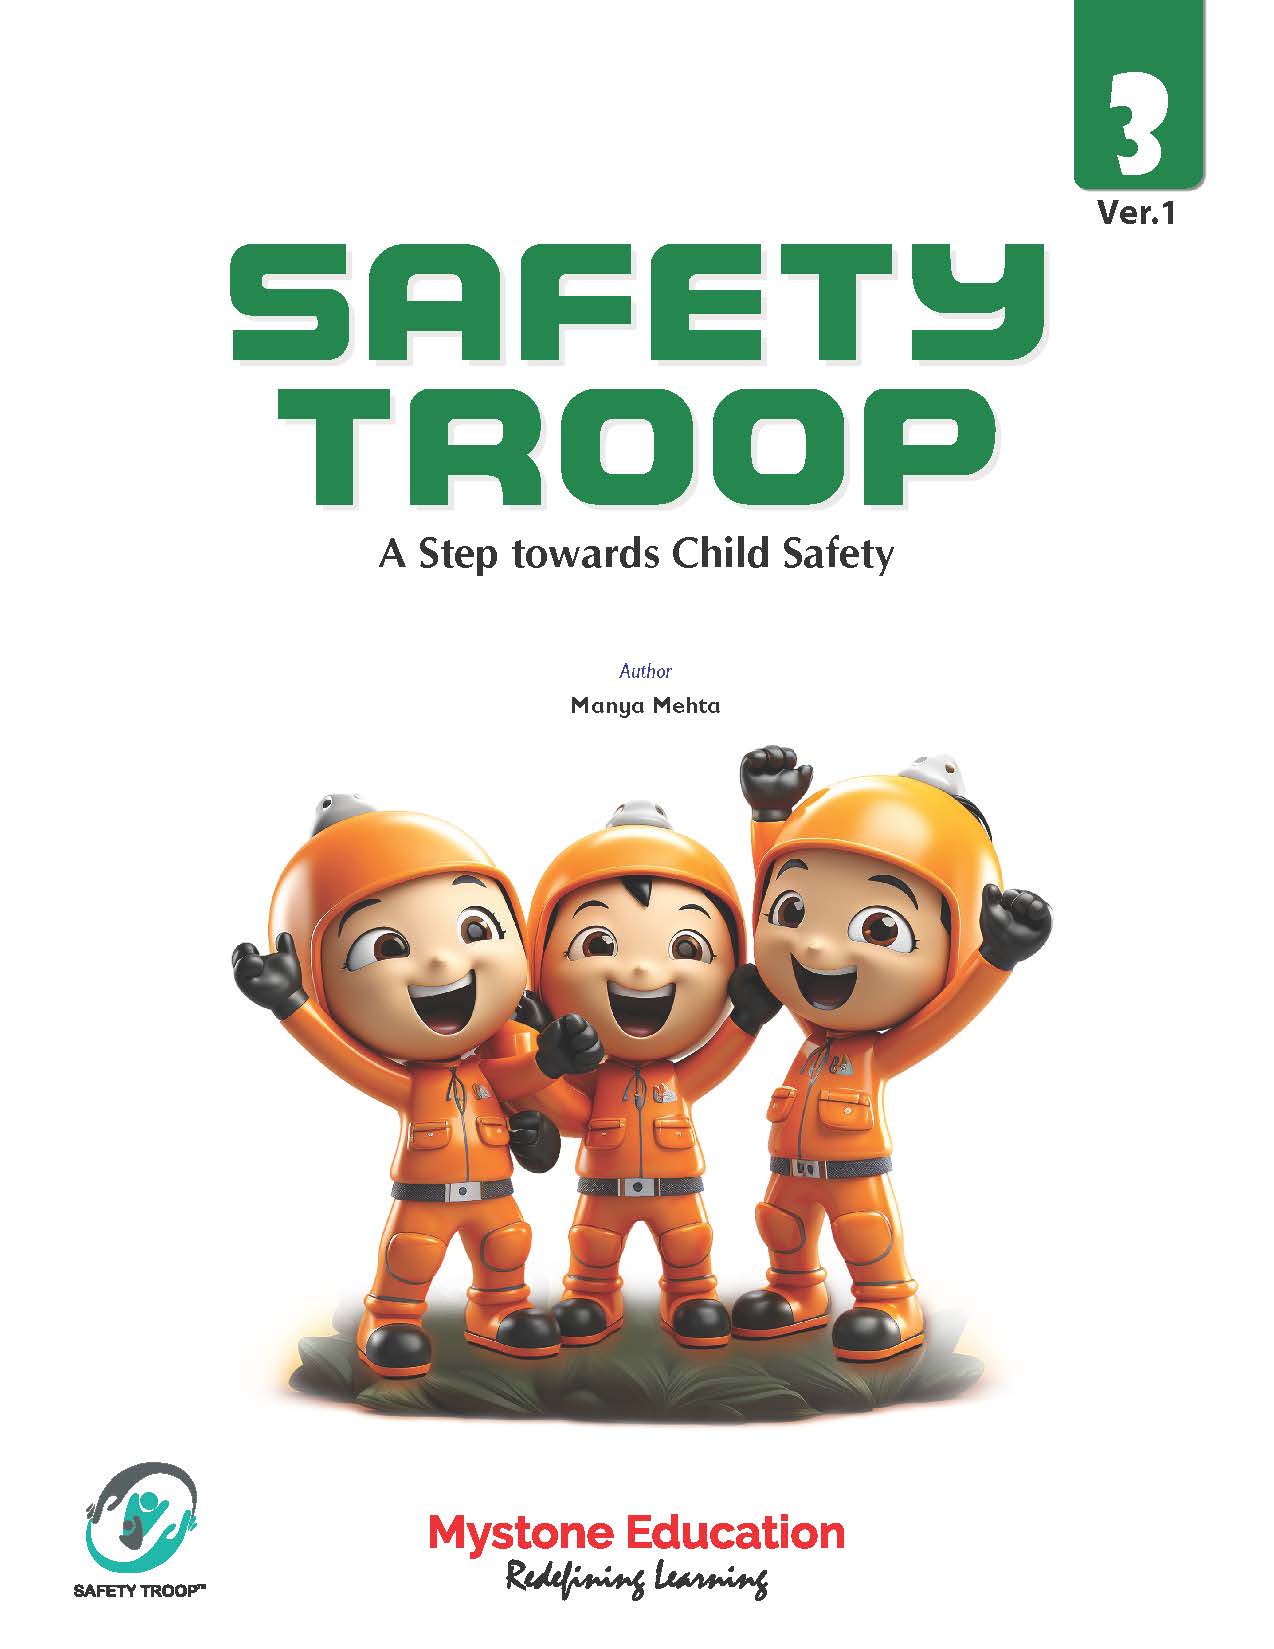 Safety Troop (A Step Towards Child Safety) Class 3 Ver 1